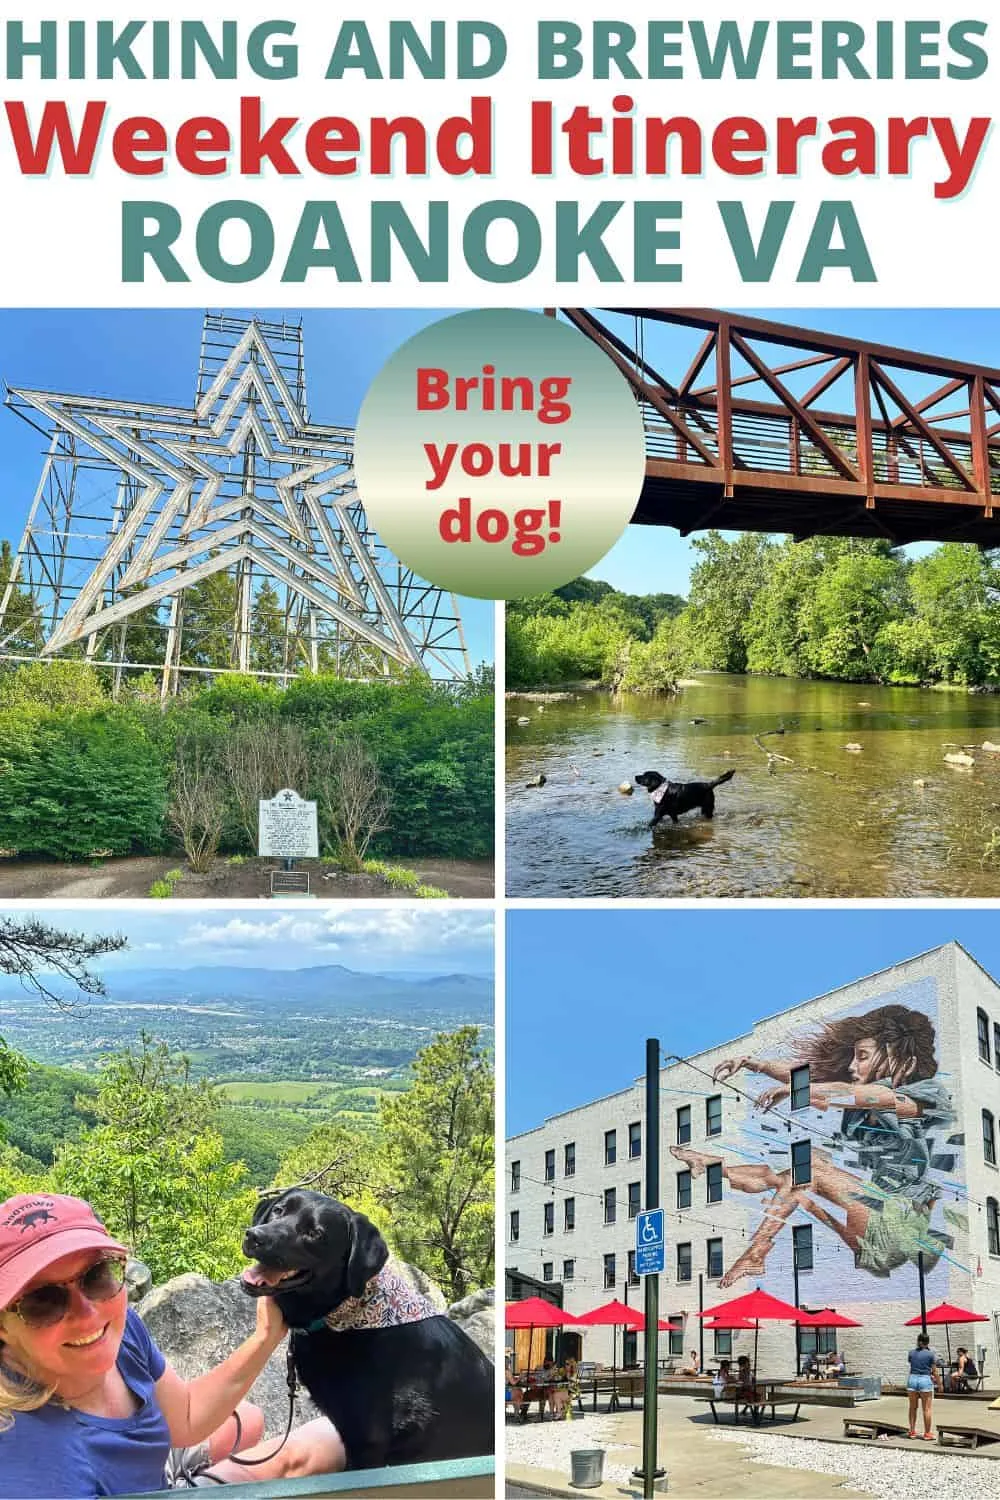 Exploring the Blue Ridge Parkway? Be sure to spend at least a weekend in Roanoke VA, where you'll find fantastic dog-friendly patios, awesome craft breweries, and great hiking trails. 